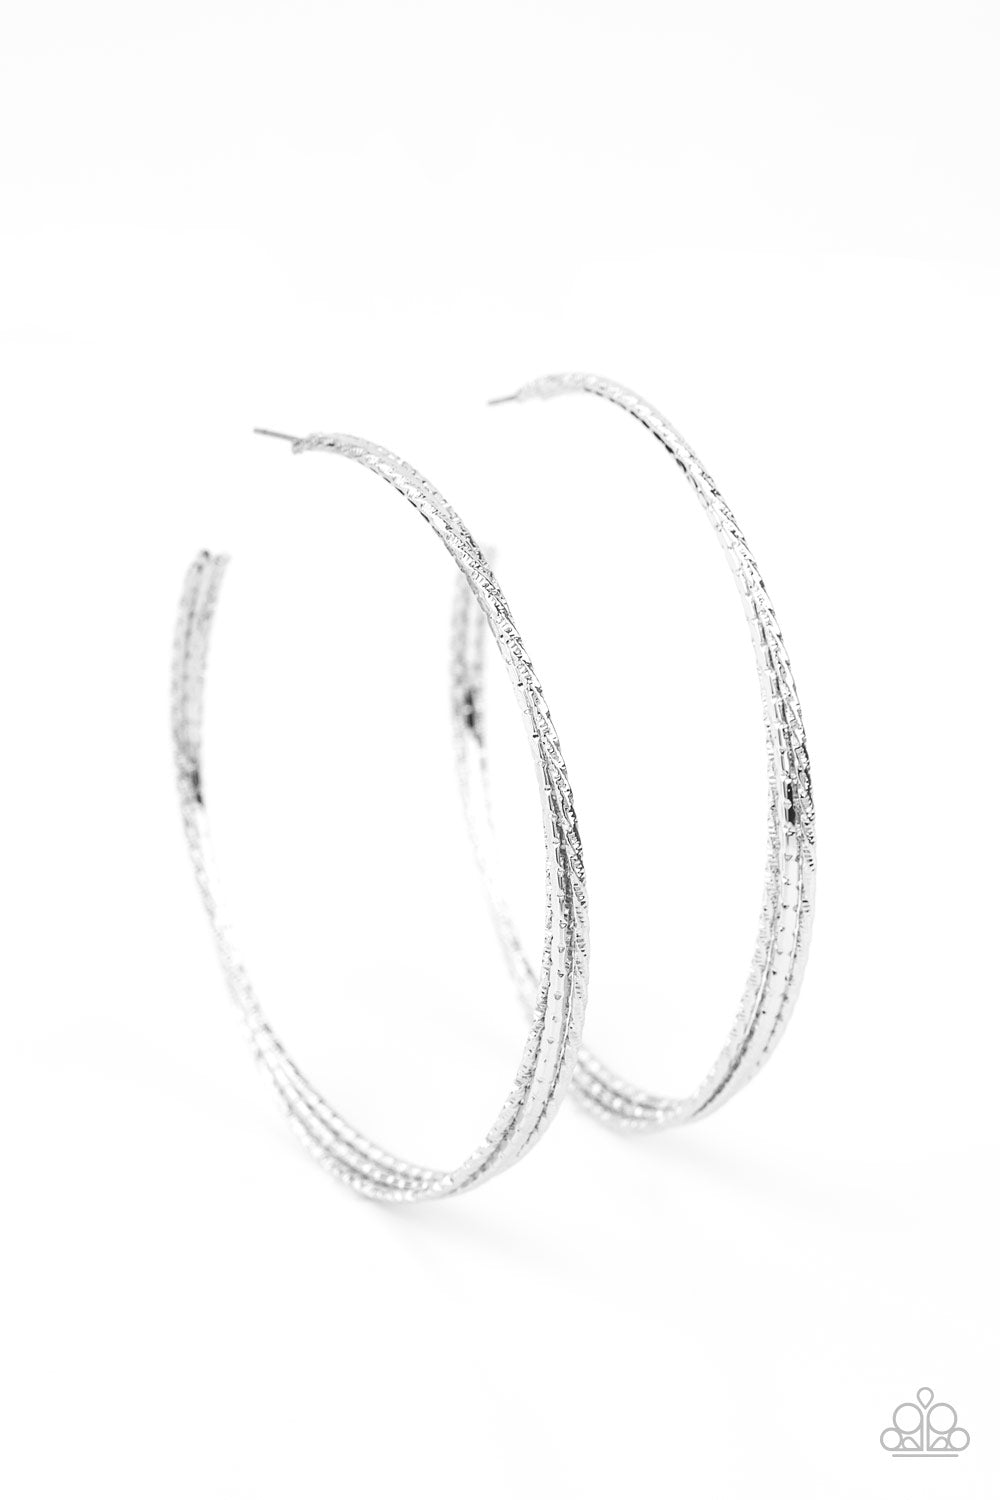 Paparazzi Watch and Learn - Silver Hoop Earrings - A Finishing Touch 